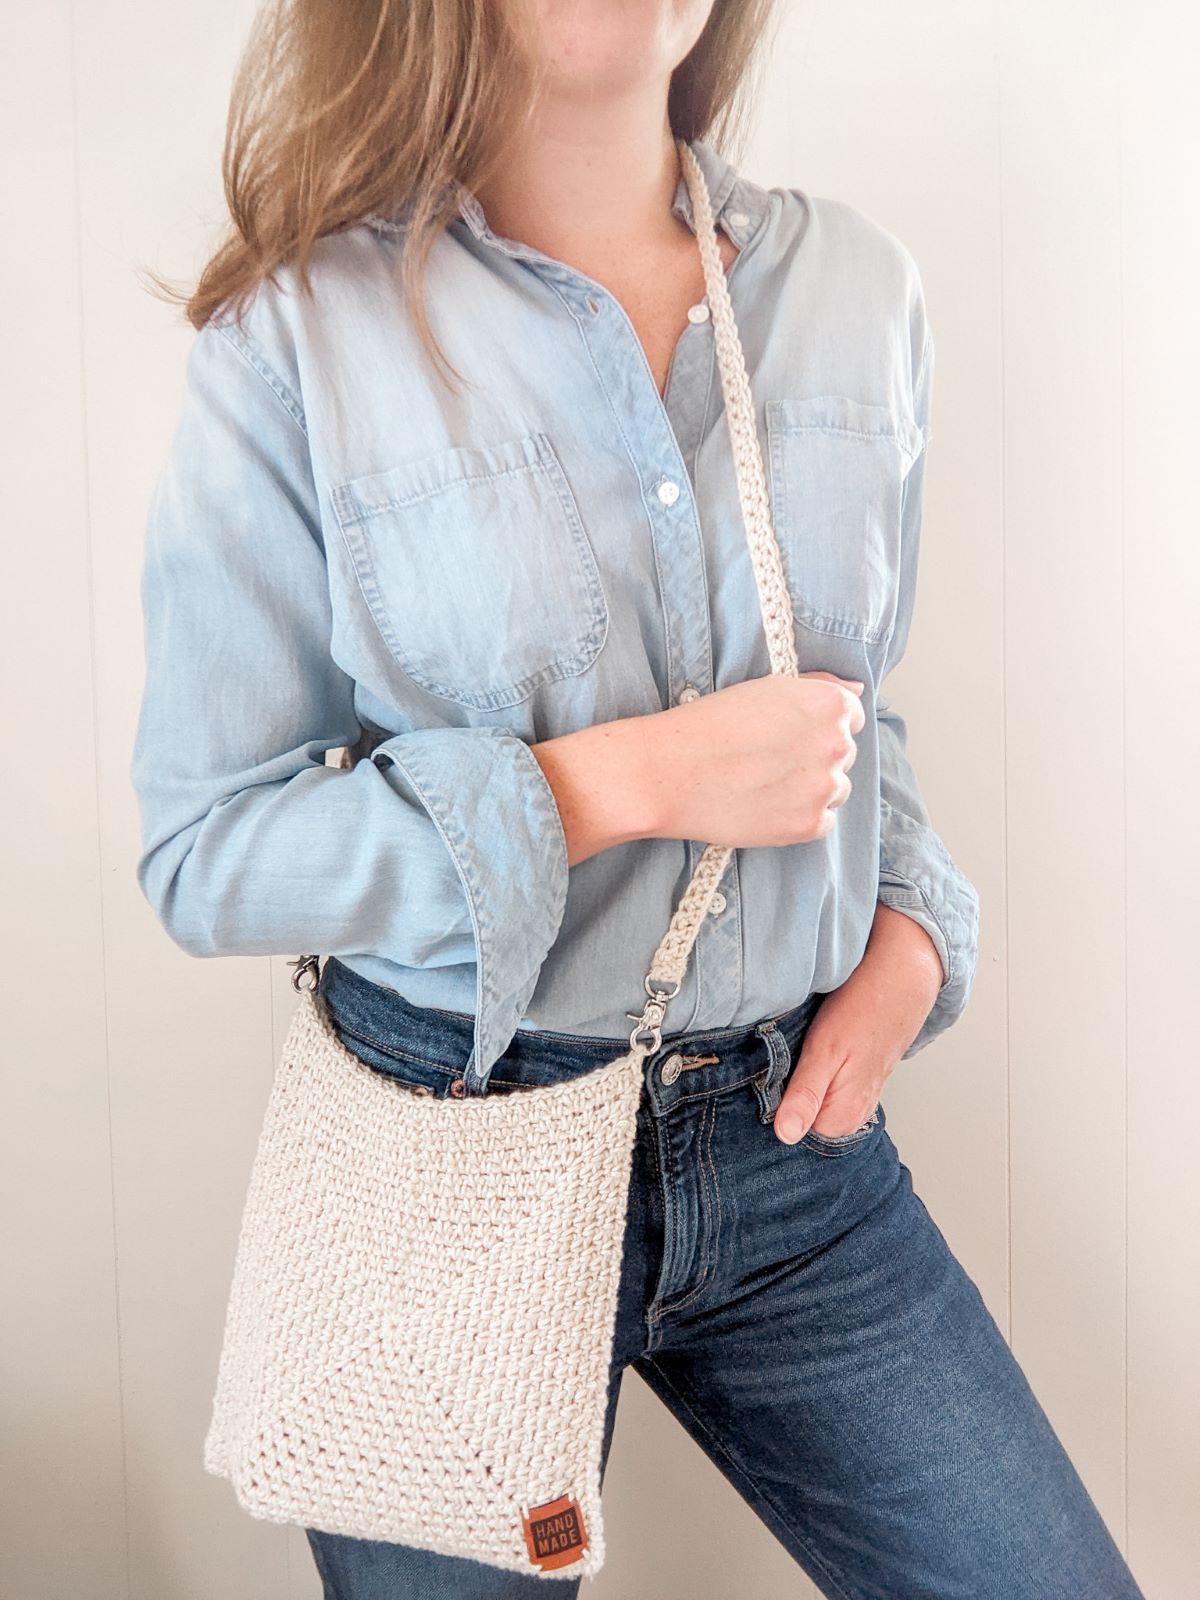 Model is wearing a crochet should bag with jeans and a long sleeve shirt.